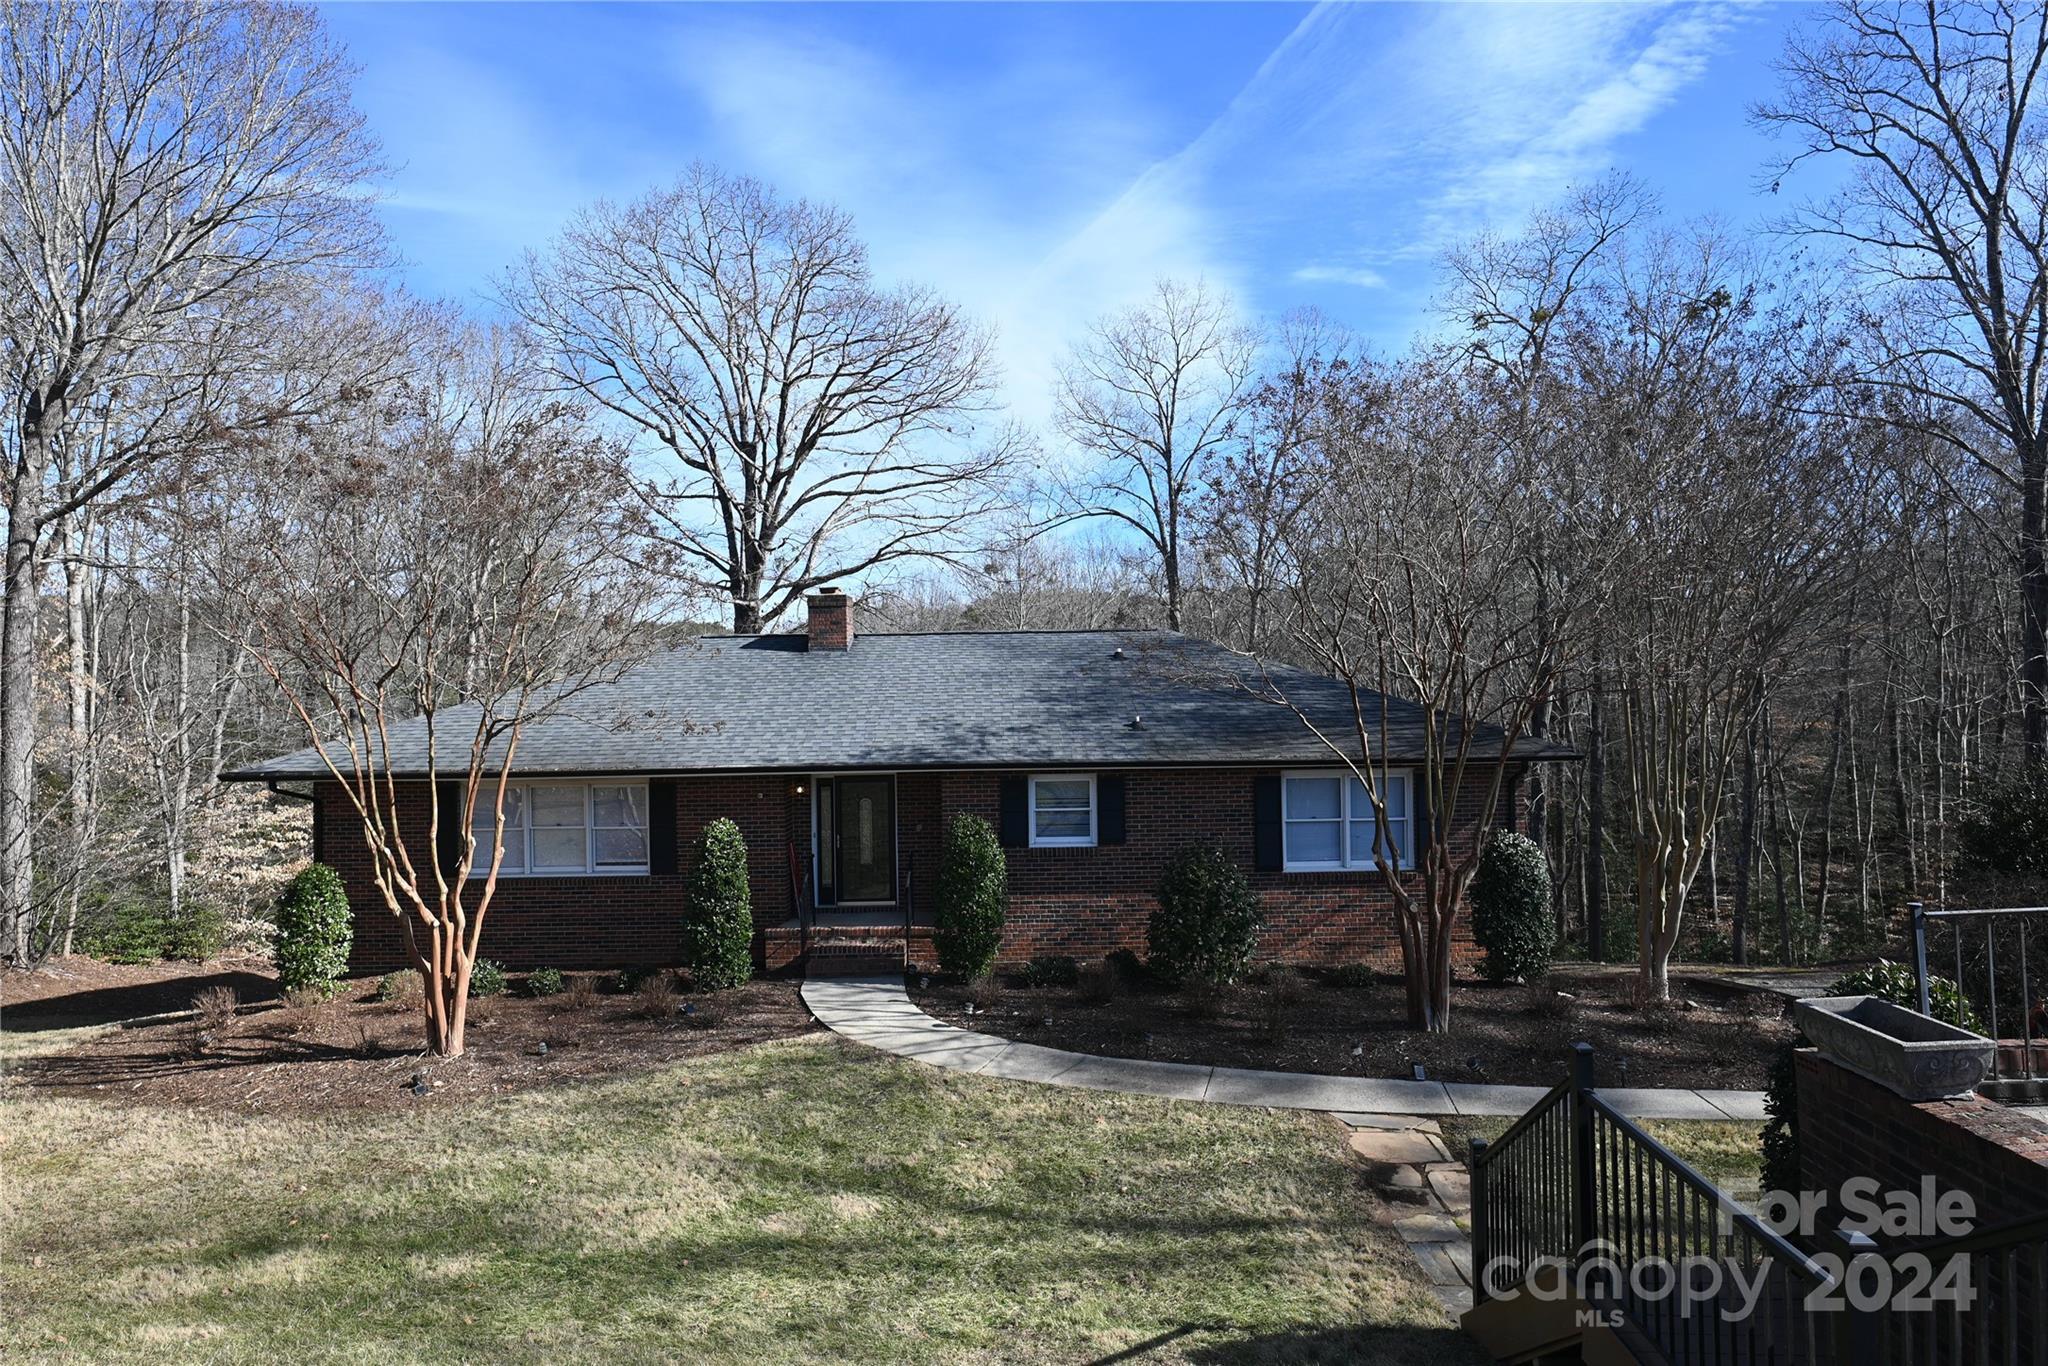 Photo one of 6230 Monford Dr Conover NC 28613 | MLS 4102237